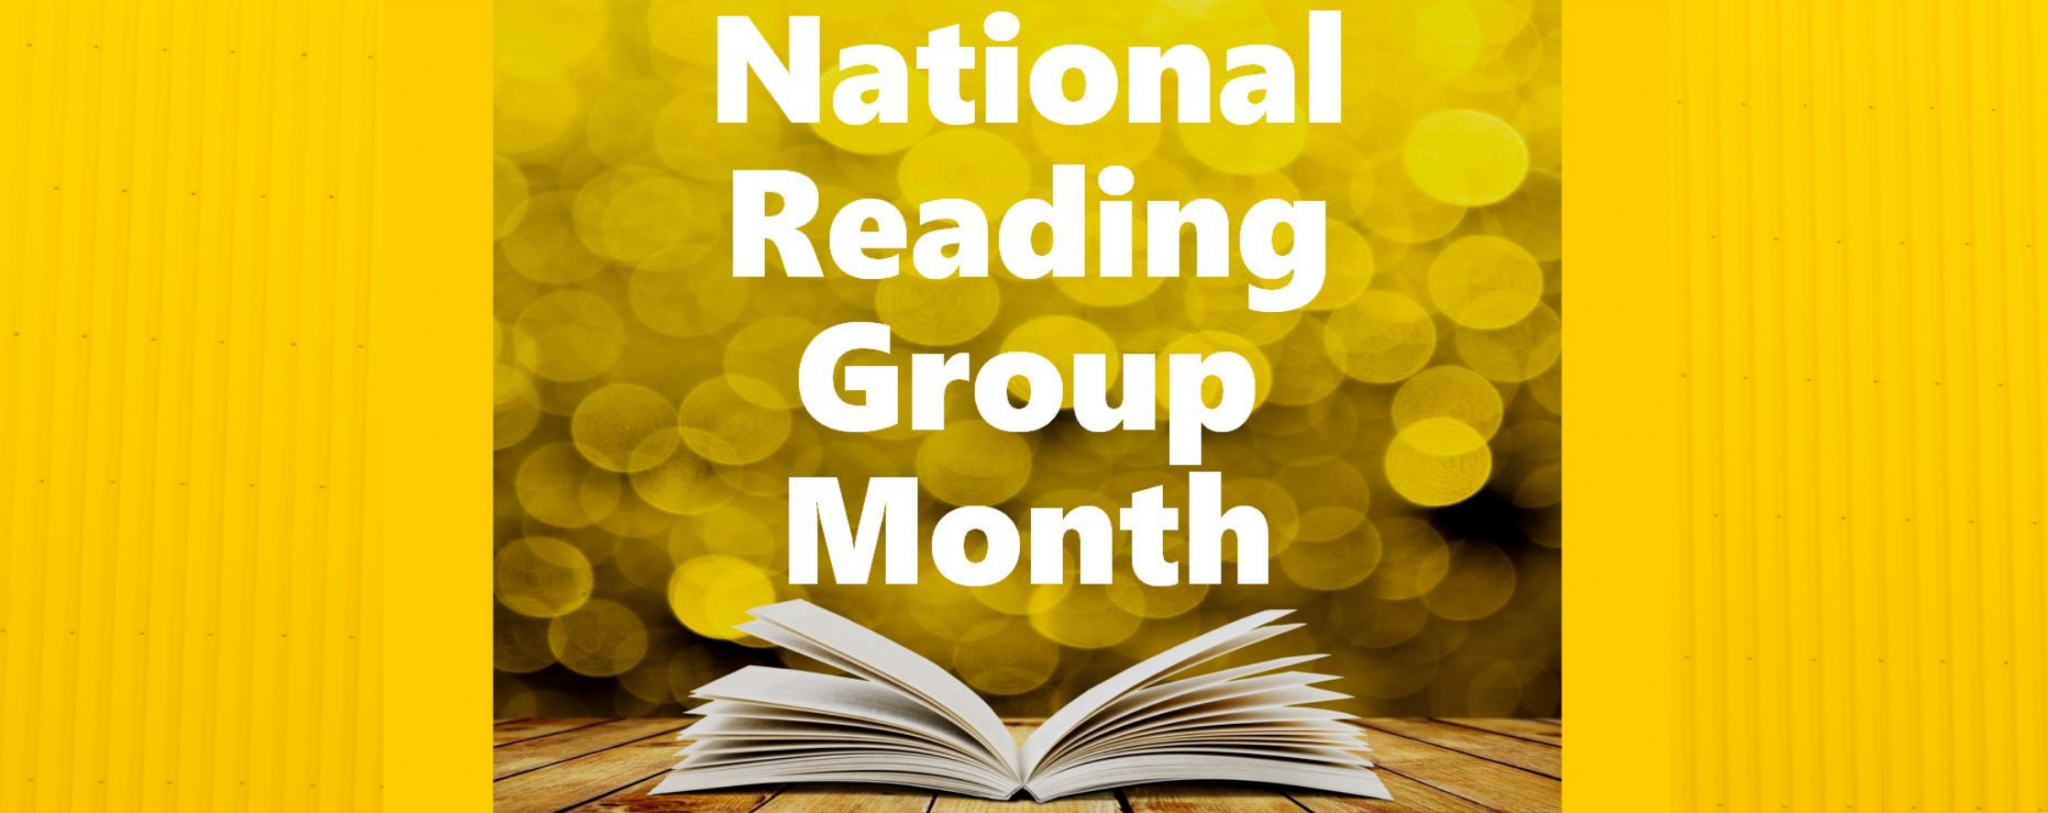 National Reading Group Month